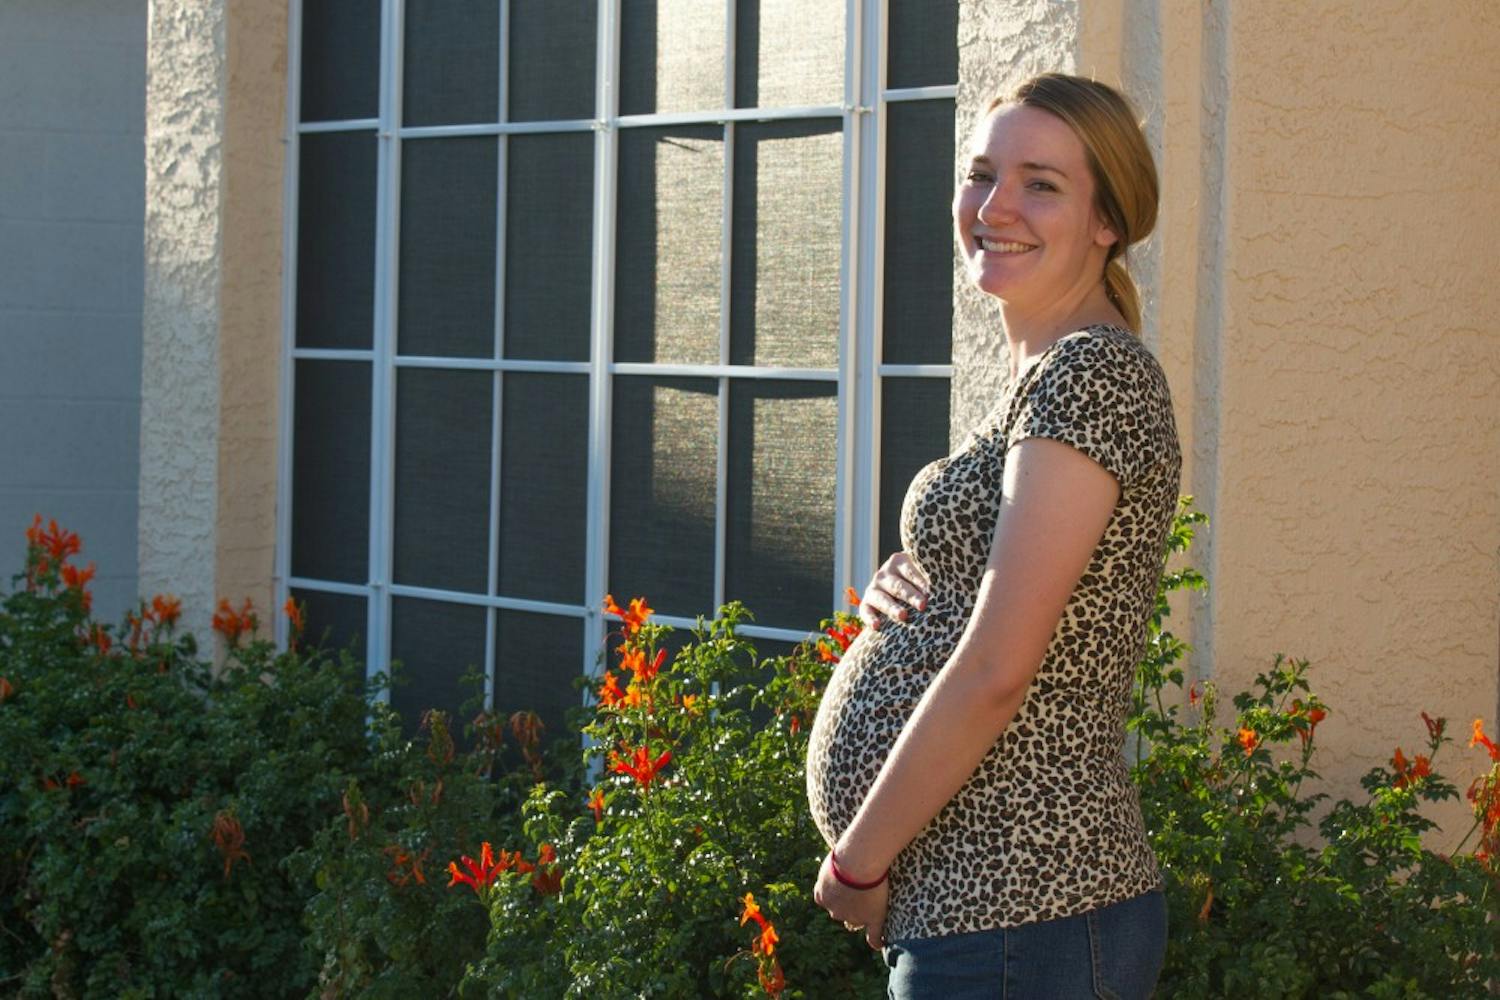 ASU human and family development&nbsp;senior&nbsp;Cassie Mortensen poses for a photo in her eighth month of pregnancy in Chandler, Arizona&nbsp;on Sunday, March 19, 2017.&nbsp;